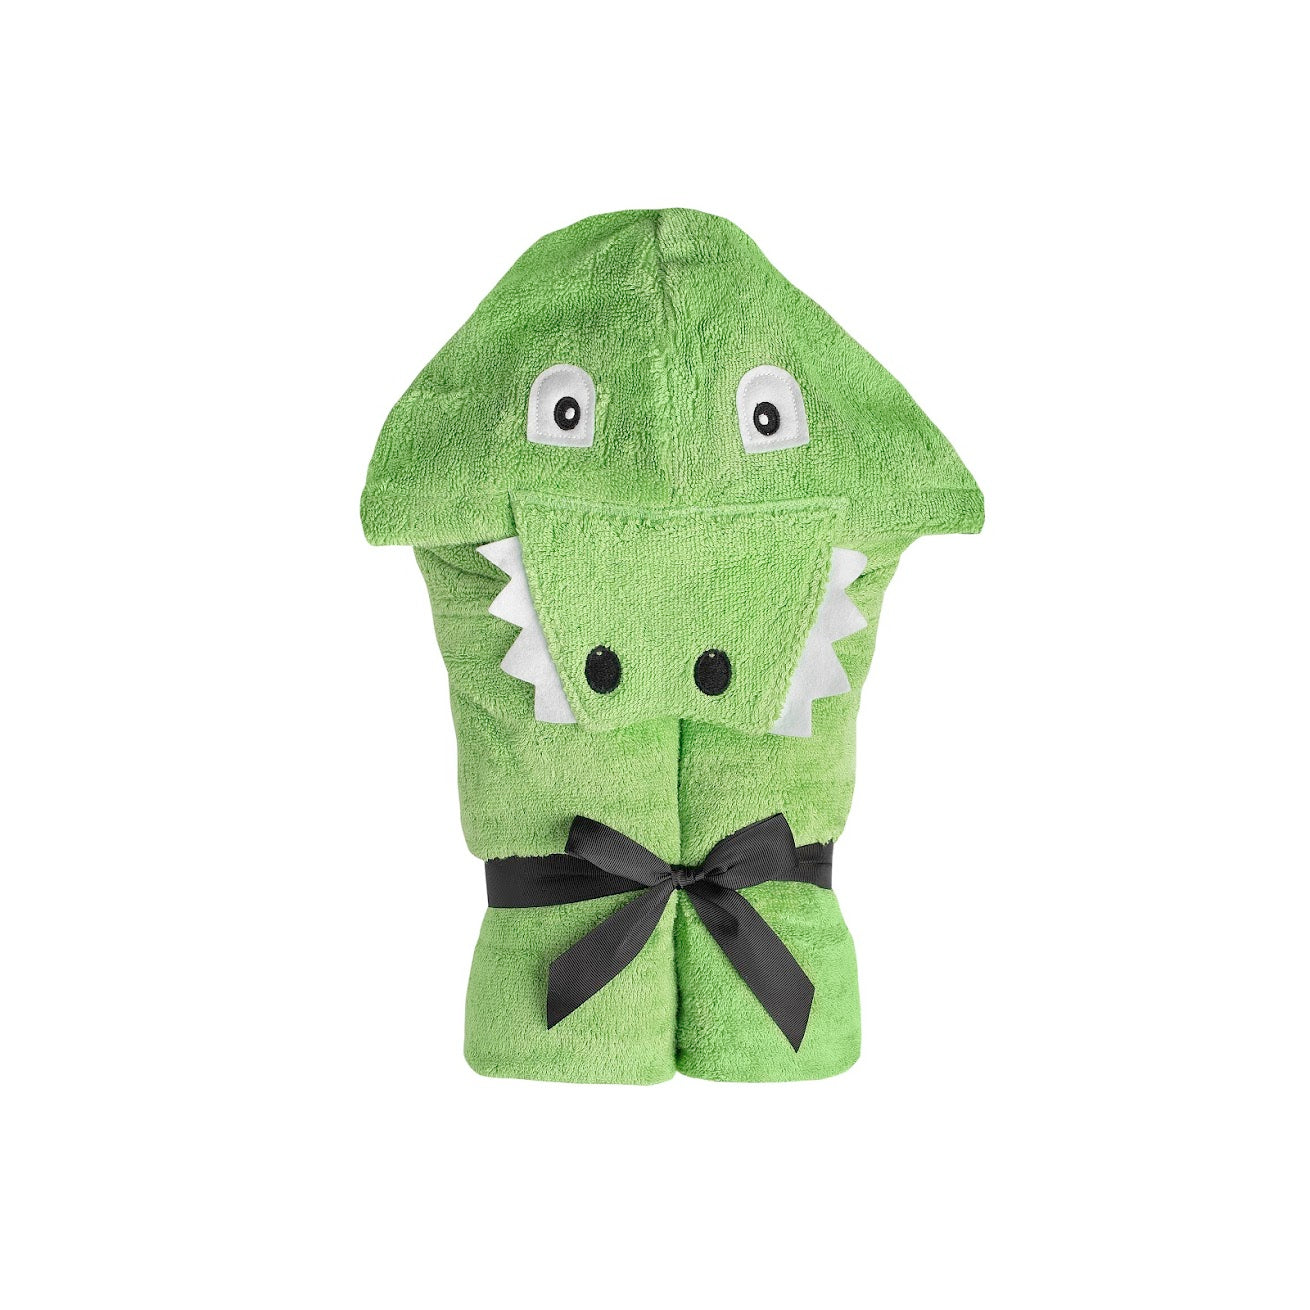 Personalized Hooded Towel- Alligator